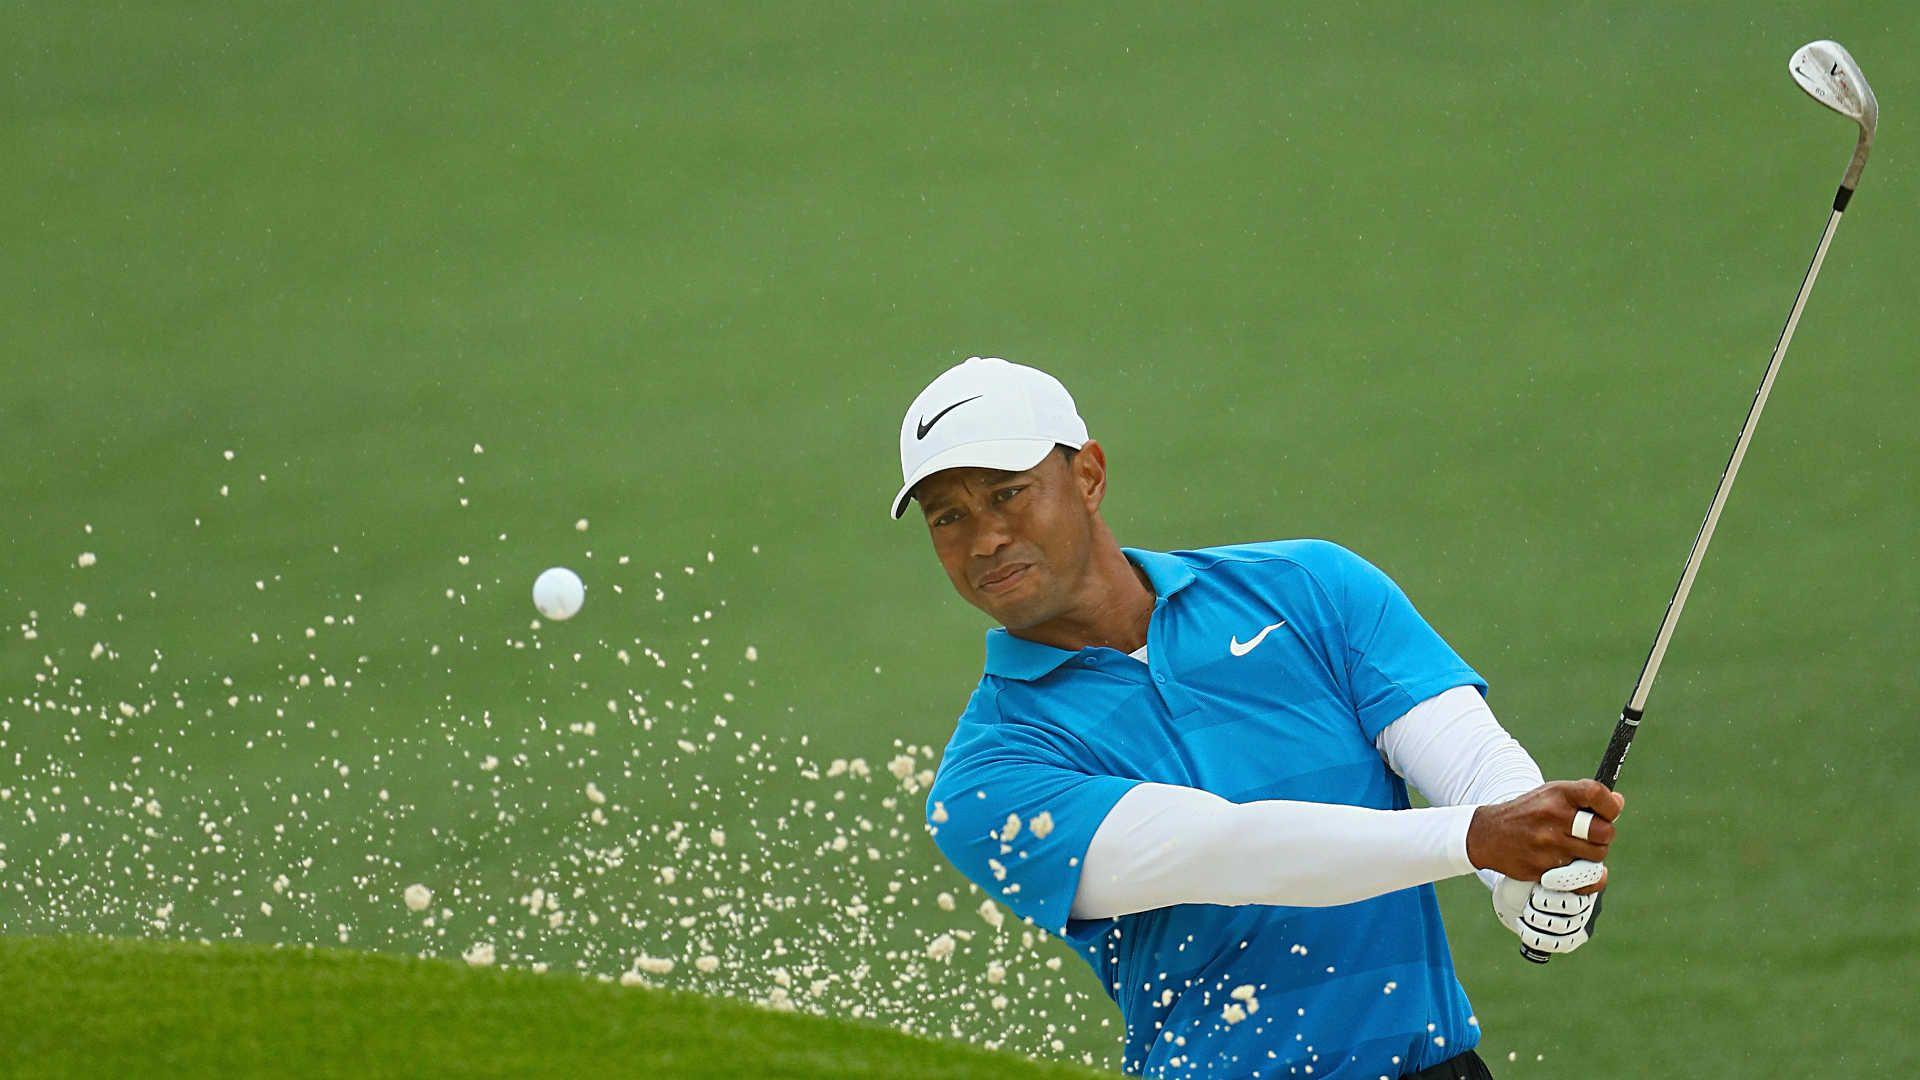 How to watch Tiger Woods live at the Wells Fargo Championship